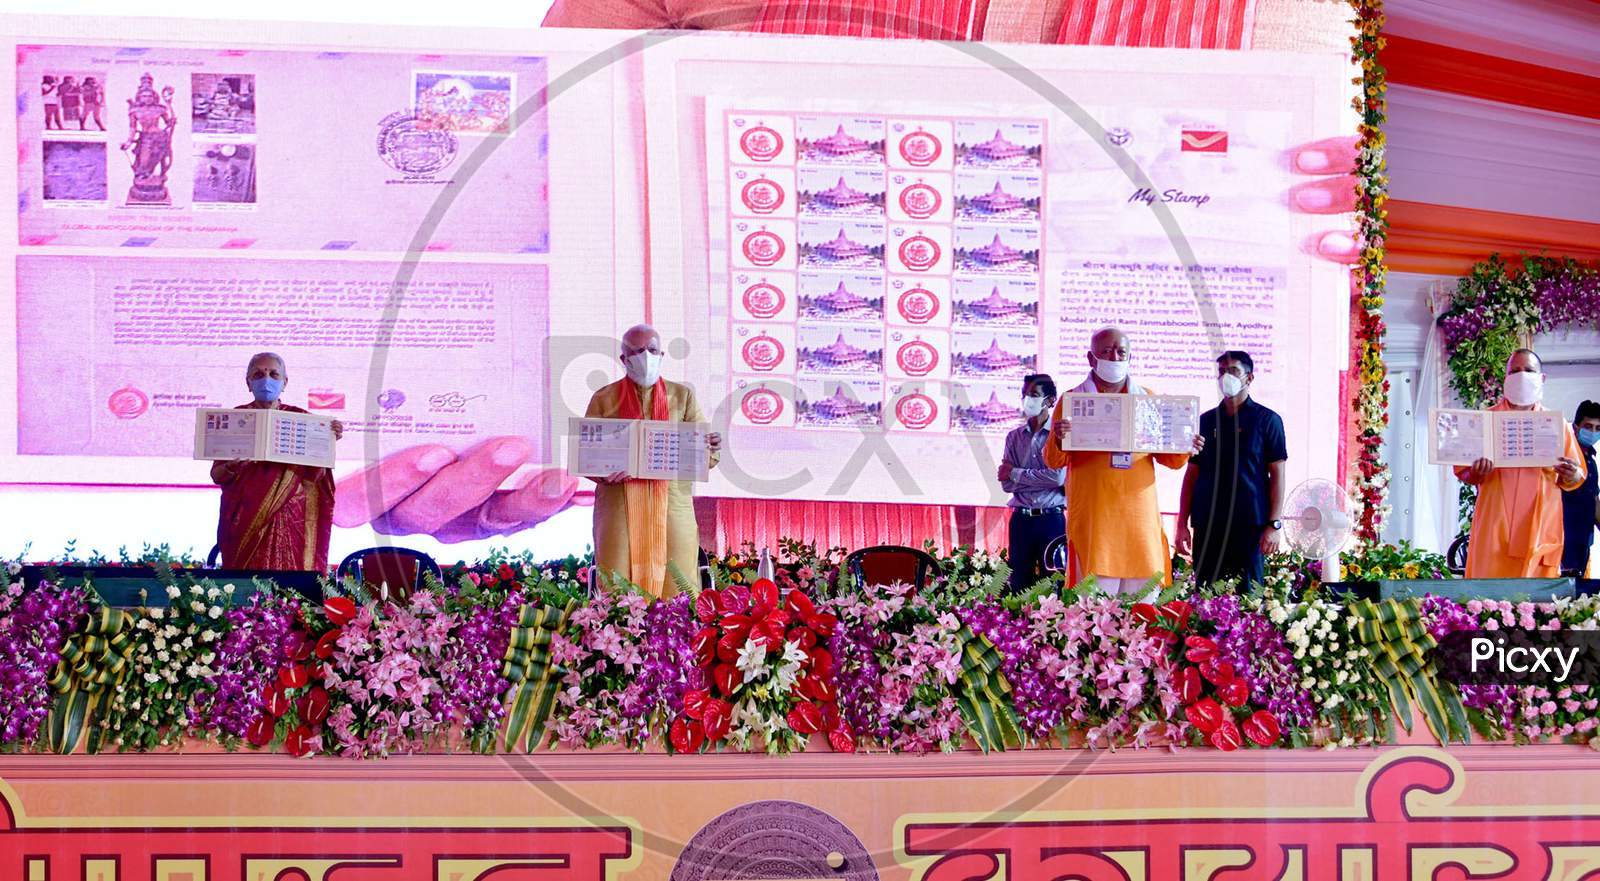 Prime Minister Narendra Modi Launches the commemorative Postal Stamp after the foundation laying ceremony for a Hindu Lord Ram's temple, in Ayodhya, India, August 5, 2020.